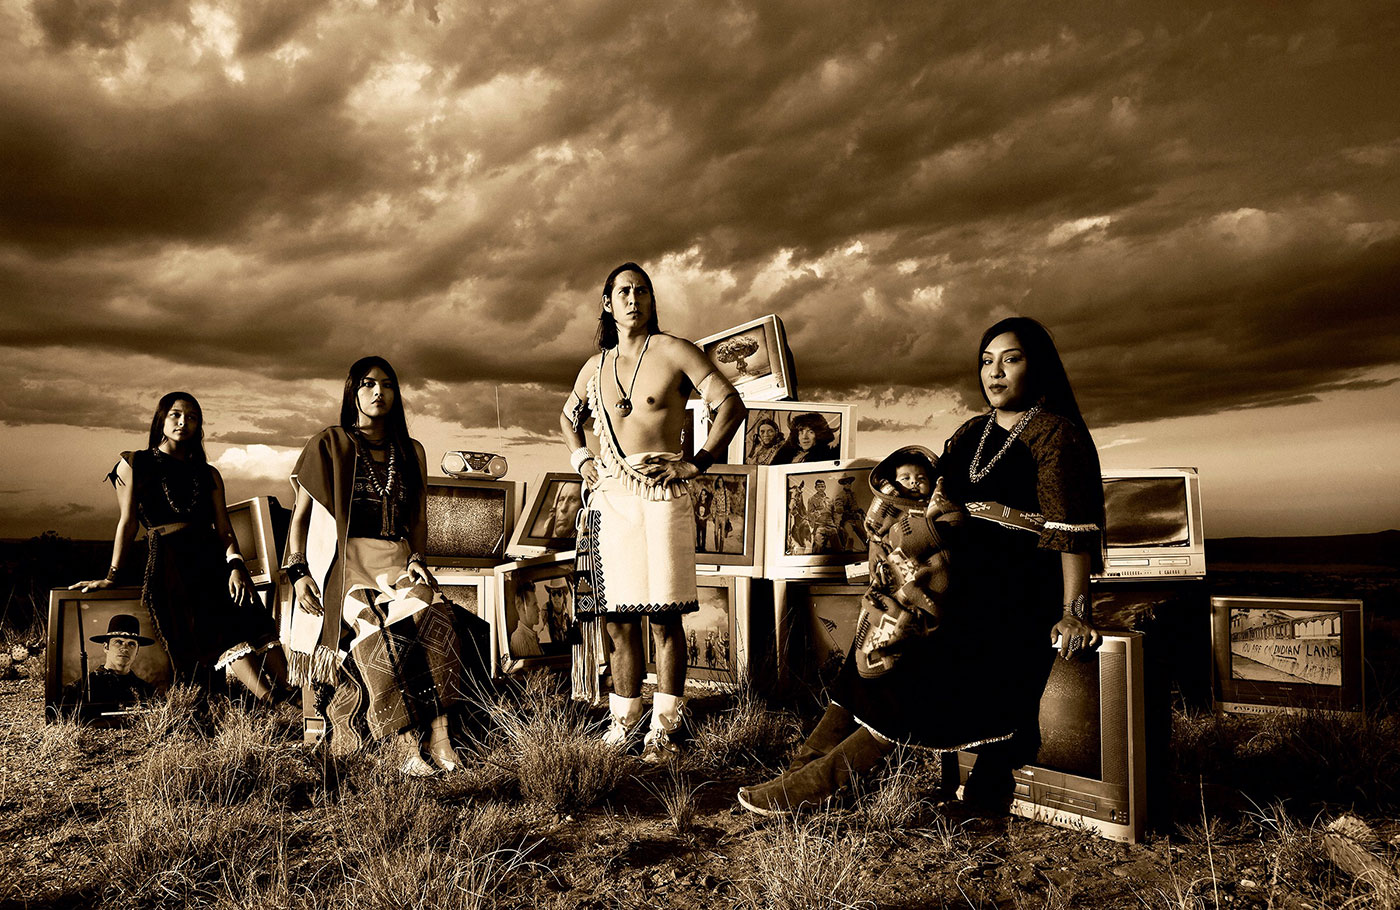  Sepia toned photograph of four adult Native Americans and a baby in traditional clothing posed in front of a series of television sets on a grassy landscape in the foreground; the television sets show images of Native Americans as represented on television or film as well as photo-documentary images that include raising the flag on Iwo Jima, a nuclear test site mushroom cloud, and an image of graffiti from the occupation of Alcatraz by Indians of All Tribes (IOAT); the background shows a dark horizon line and an abundance of clouds overhead.